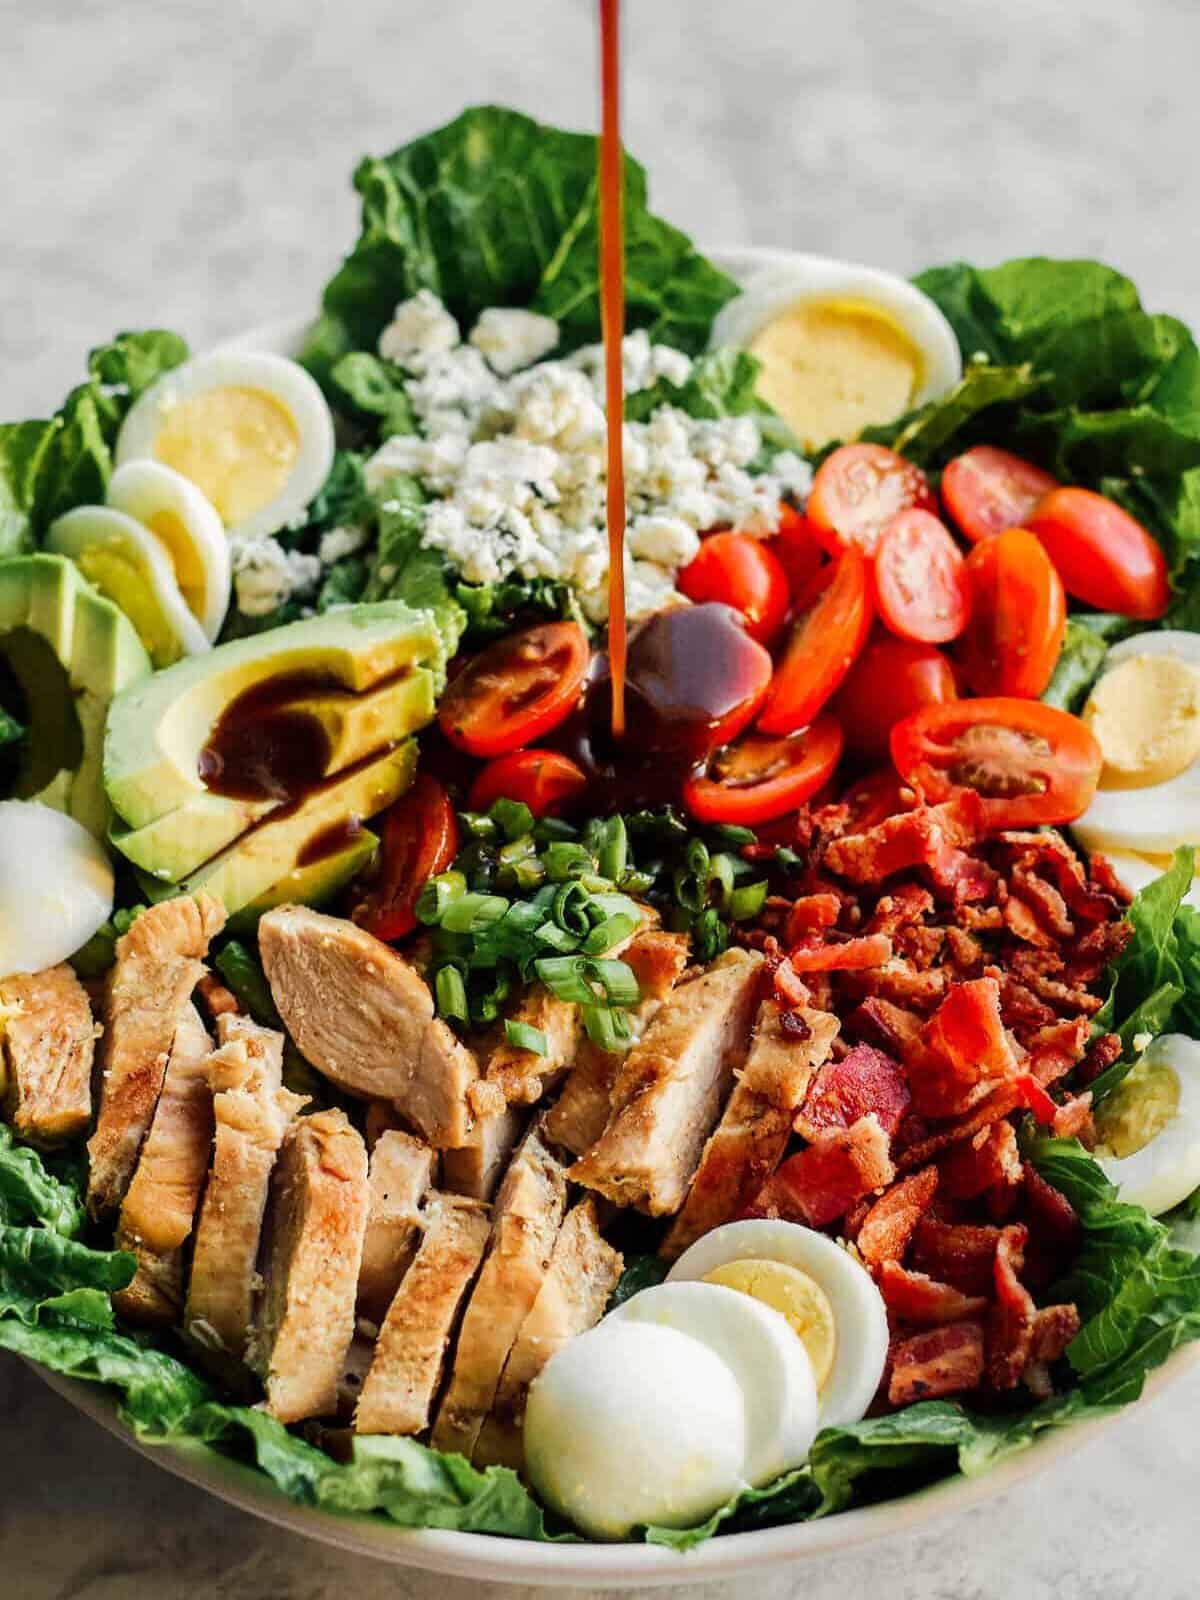 pouring dressing on chicken cobb salad